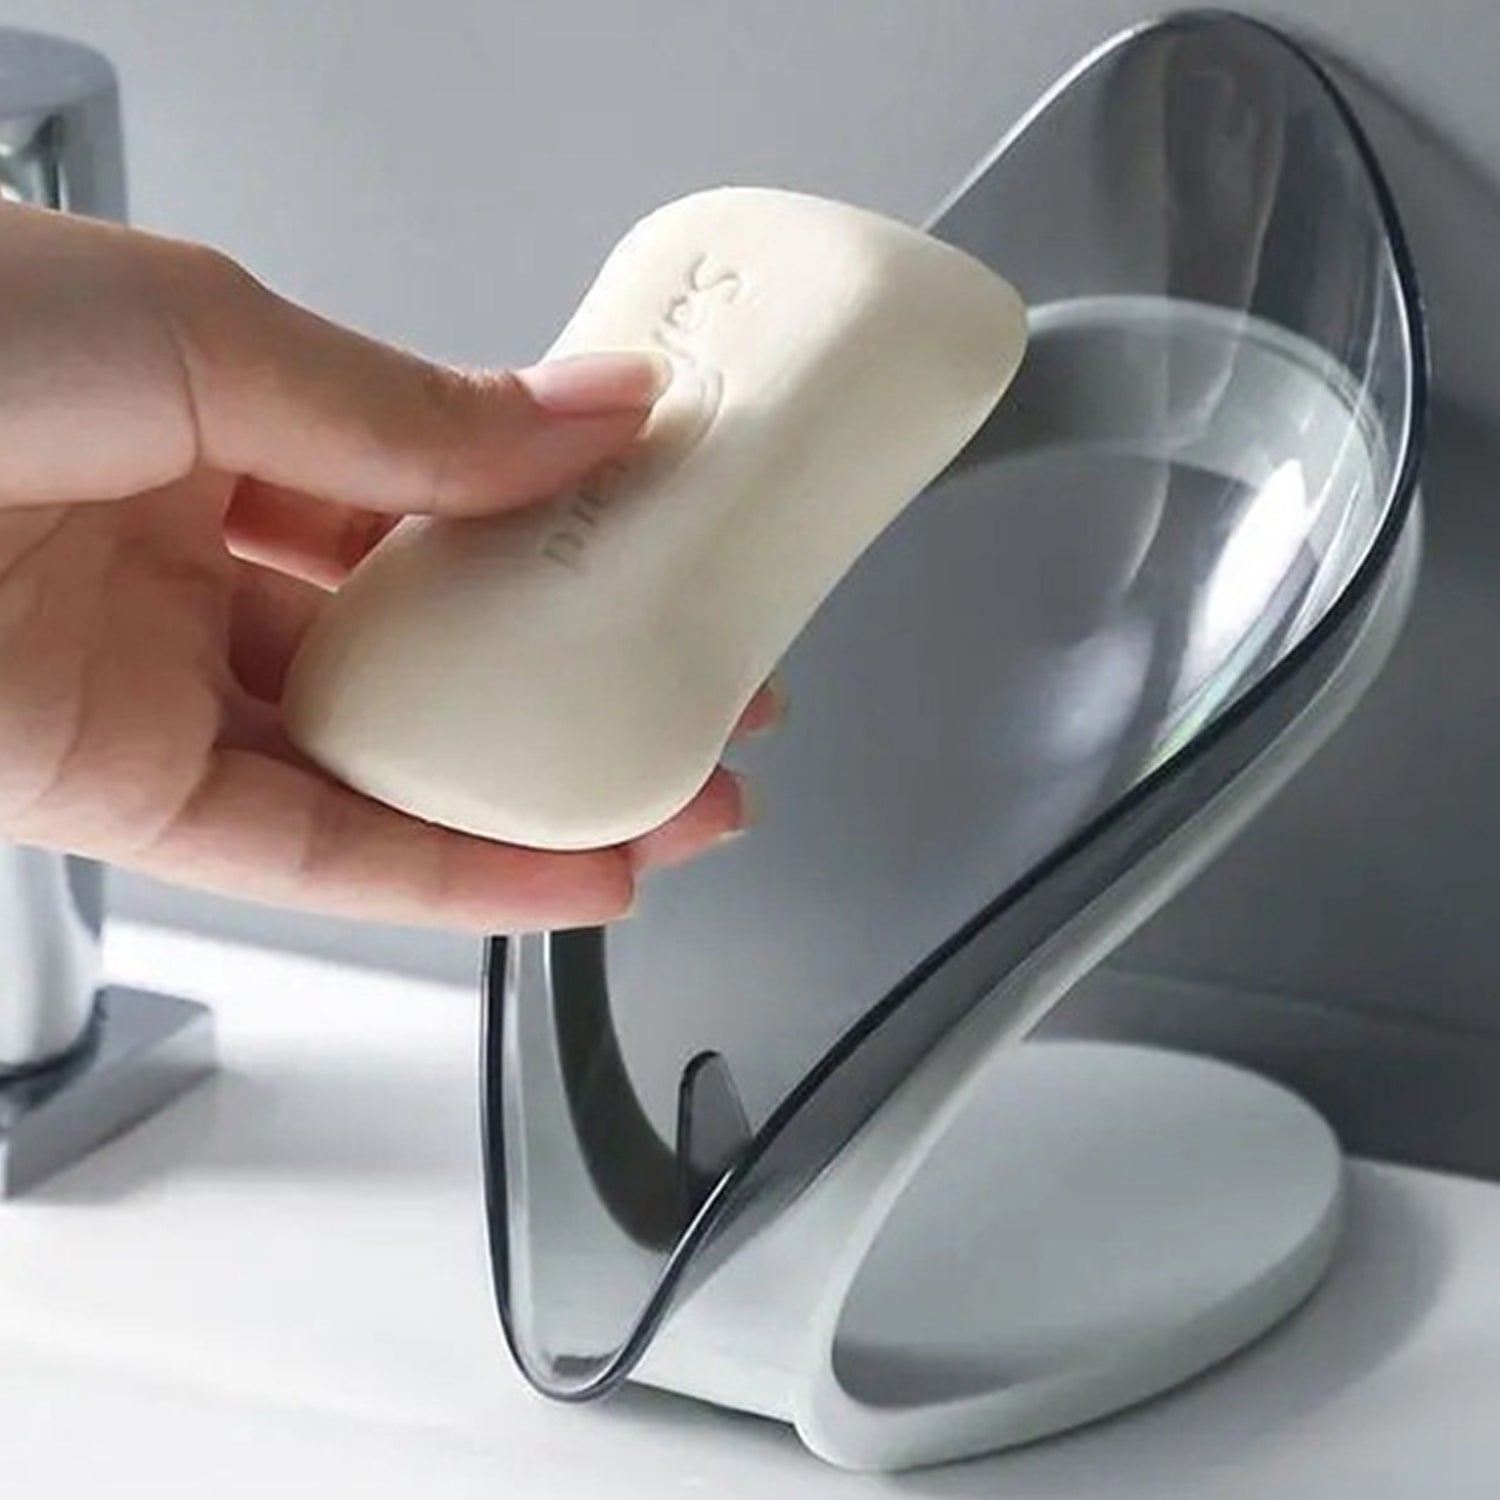 4794 New Leaf Soap Box used in all kinds of household and bathroom places as a soap stand and case.